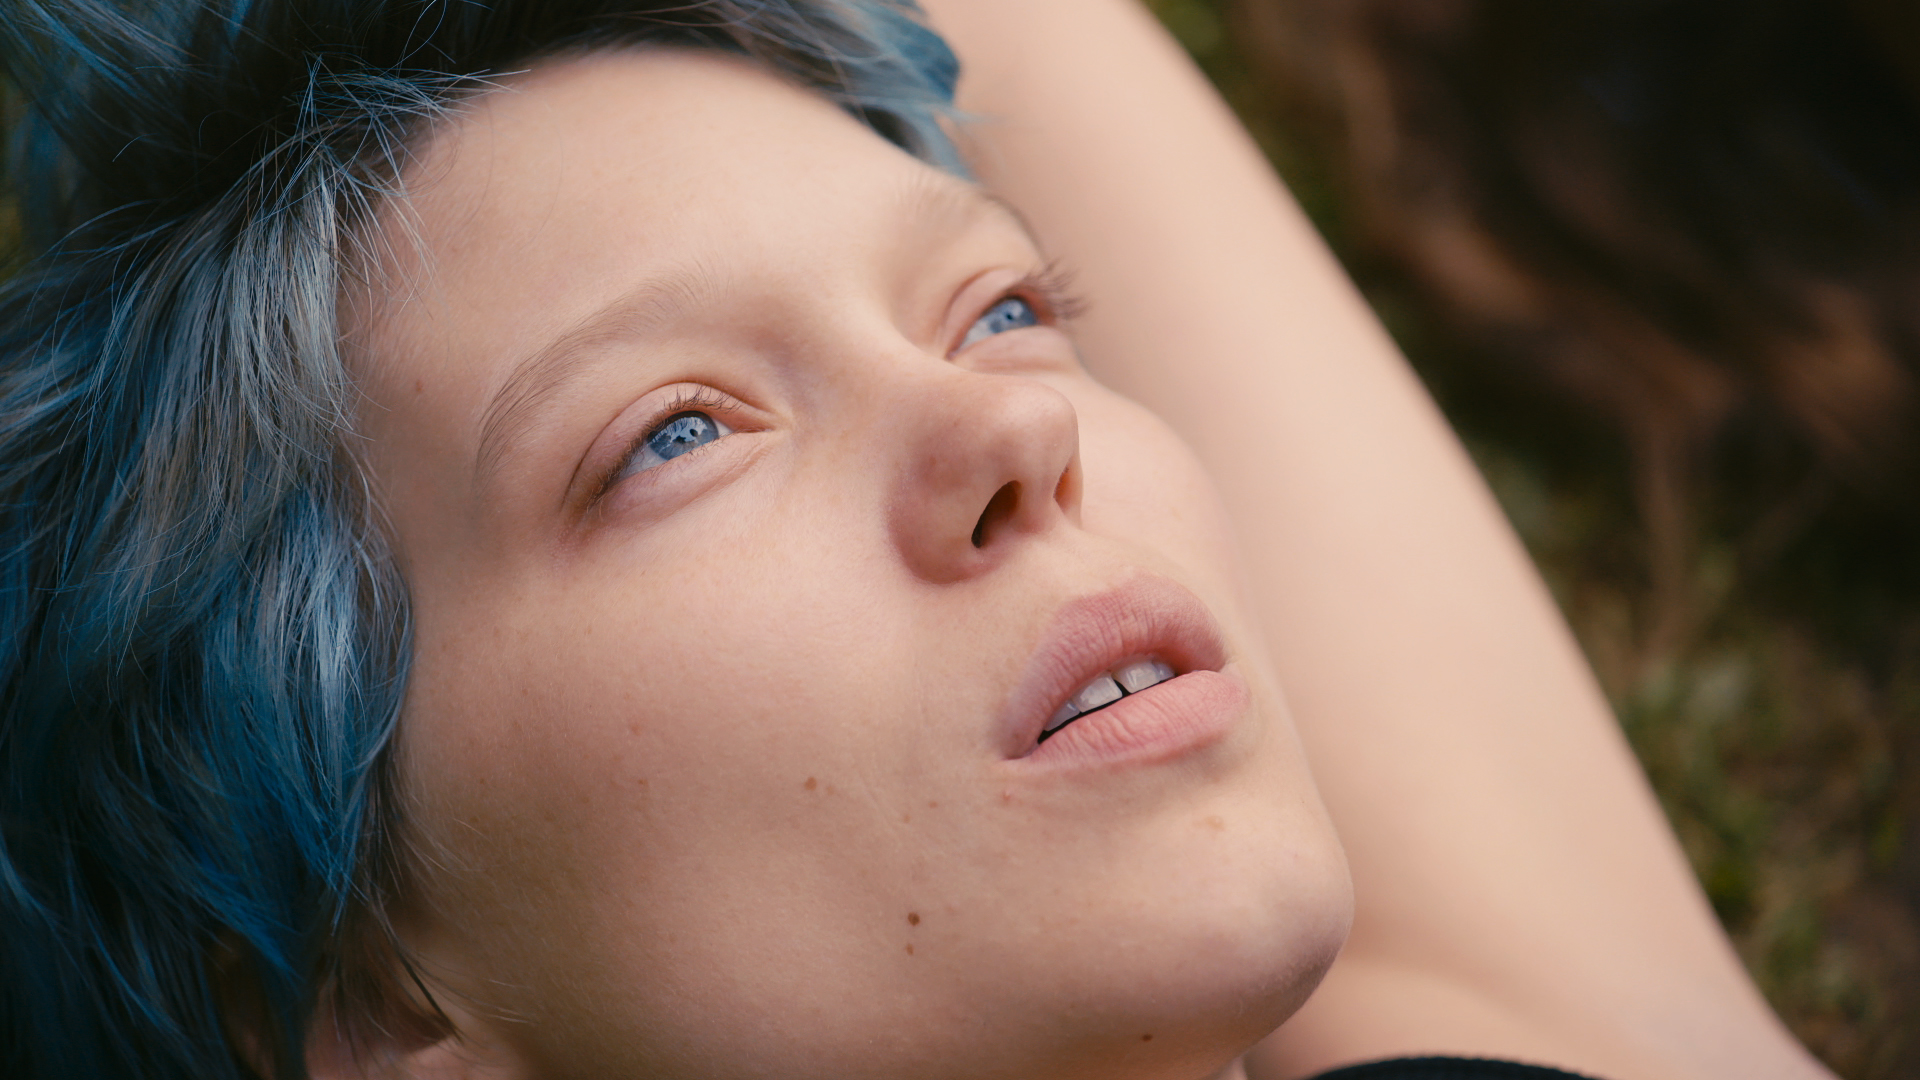 adele blue is the warmest colour